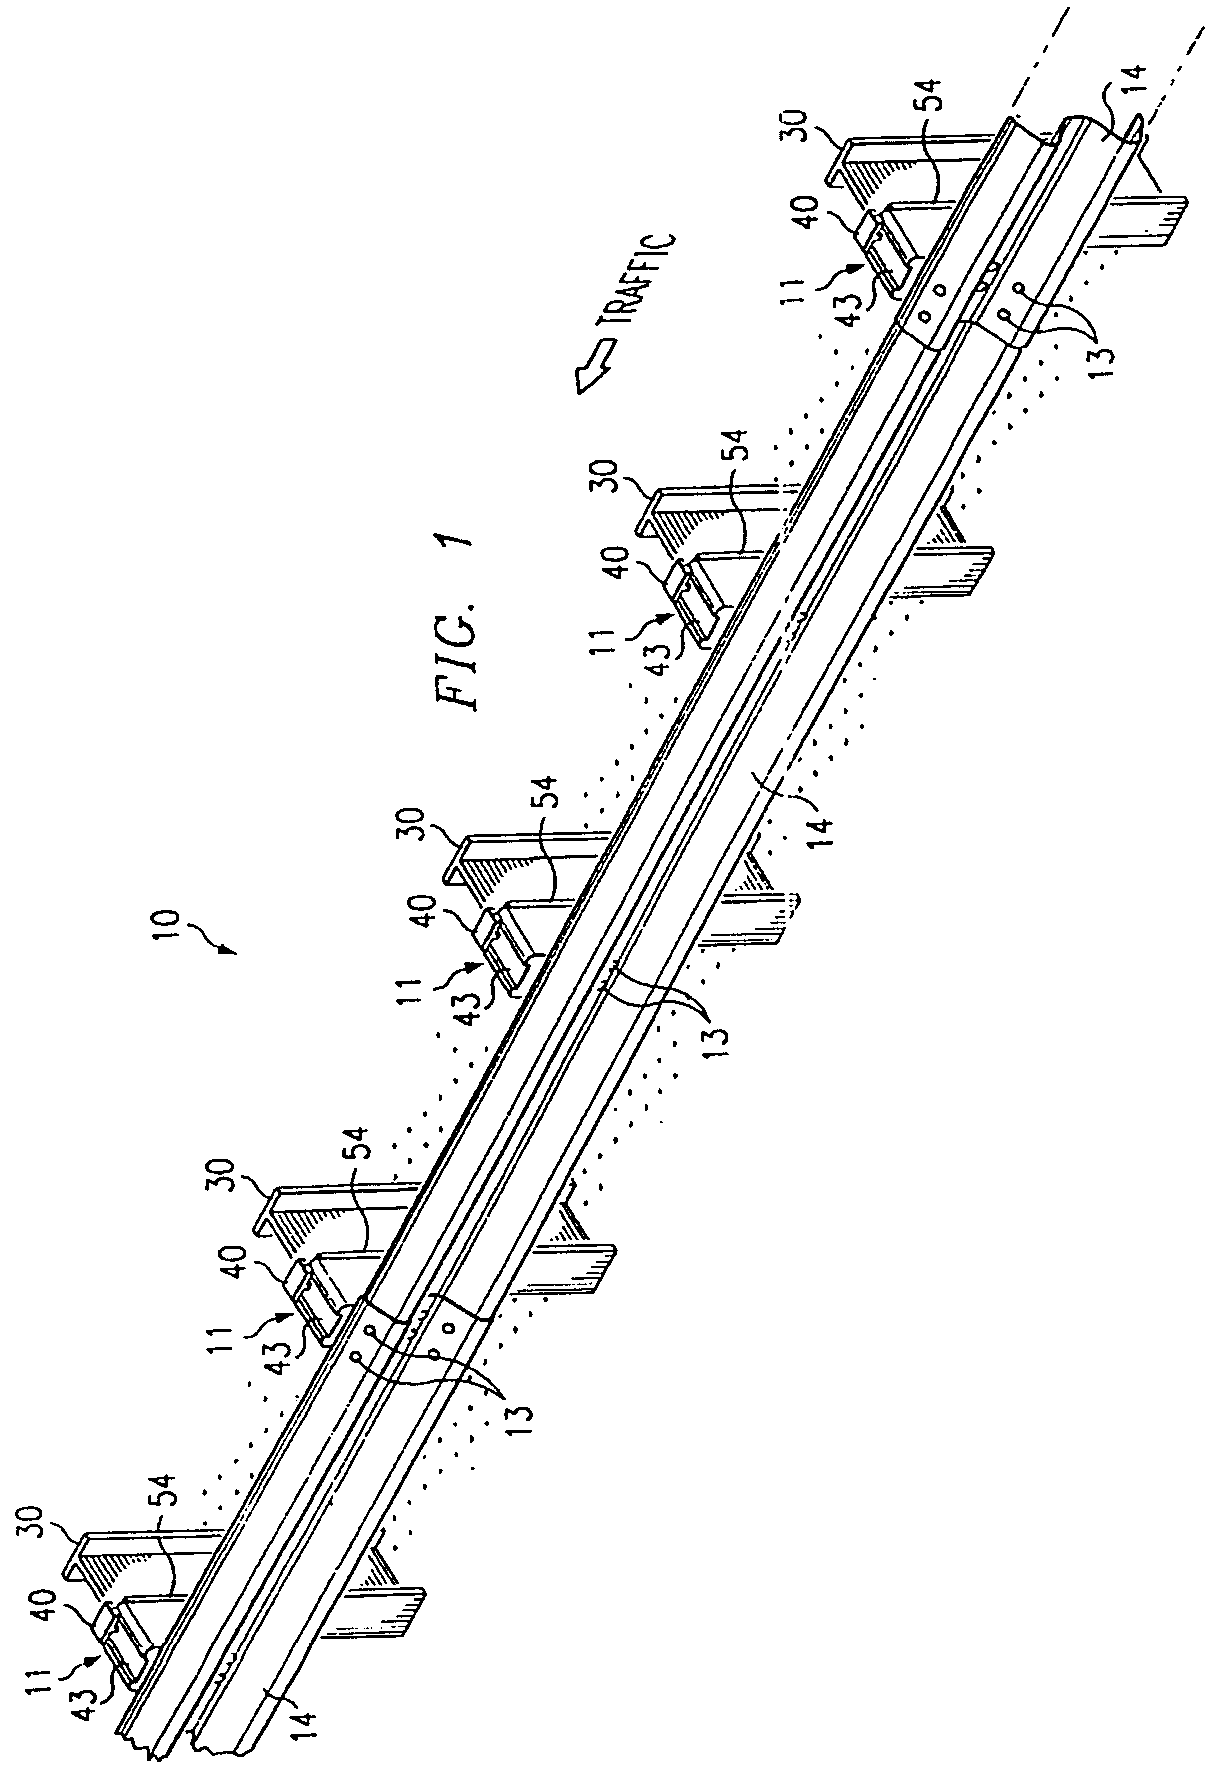 Guardrail support, attachment, and positioning block